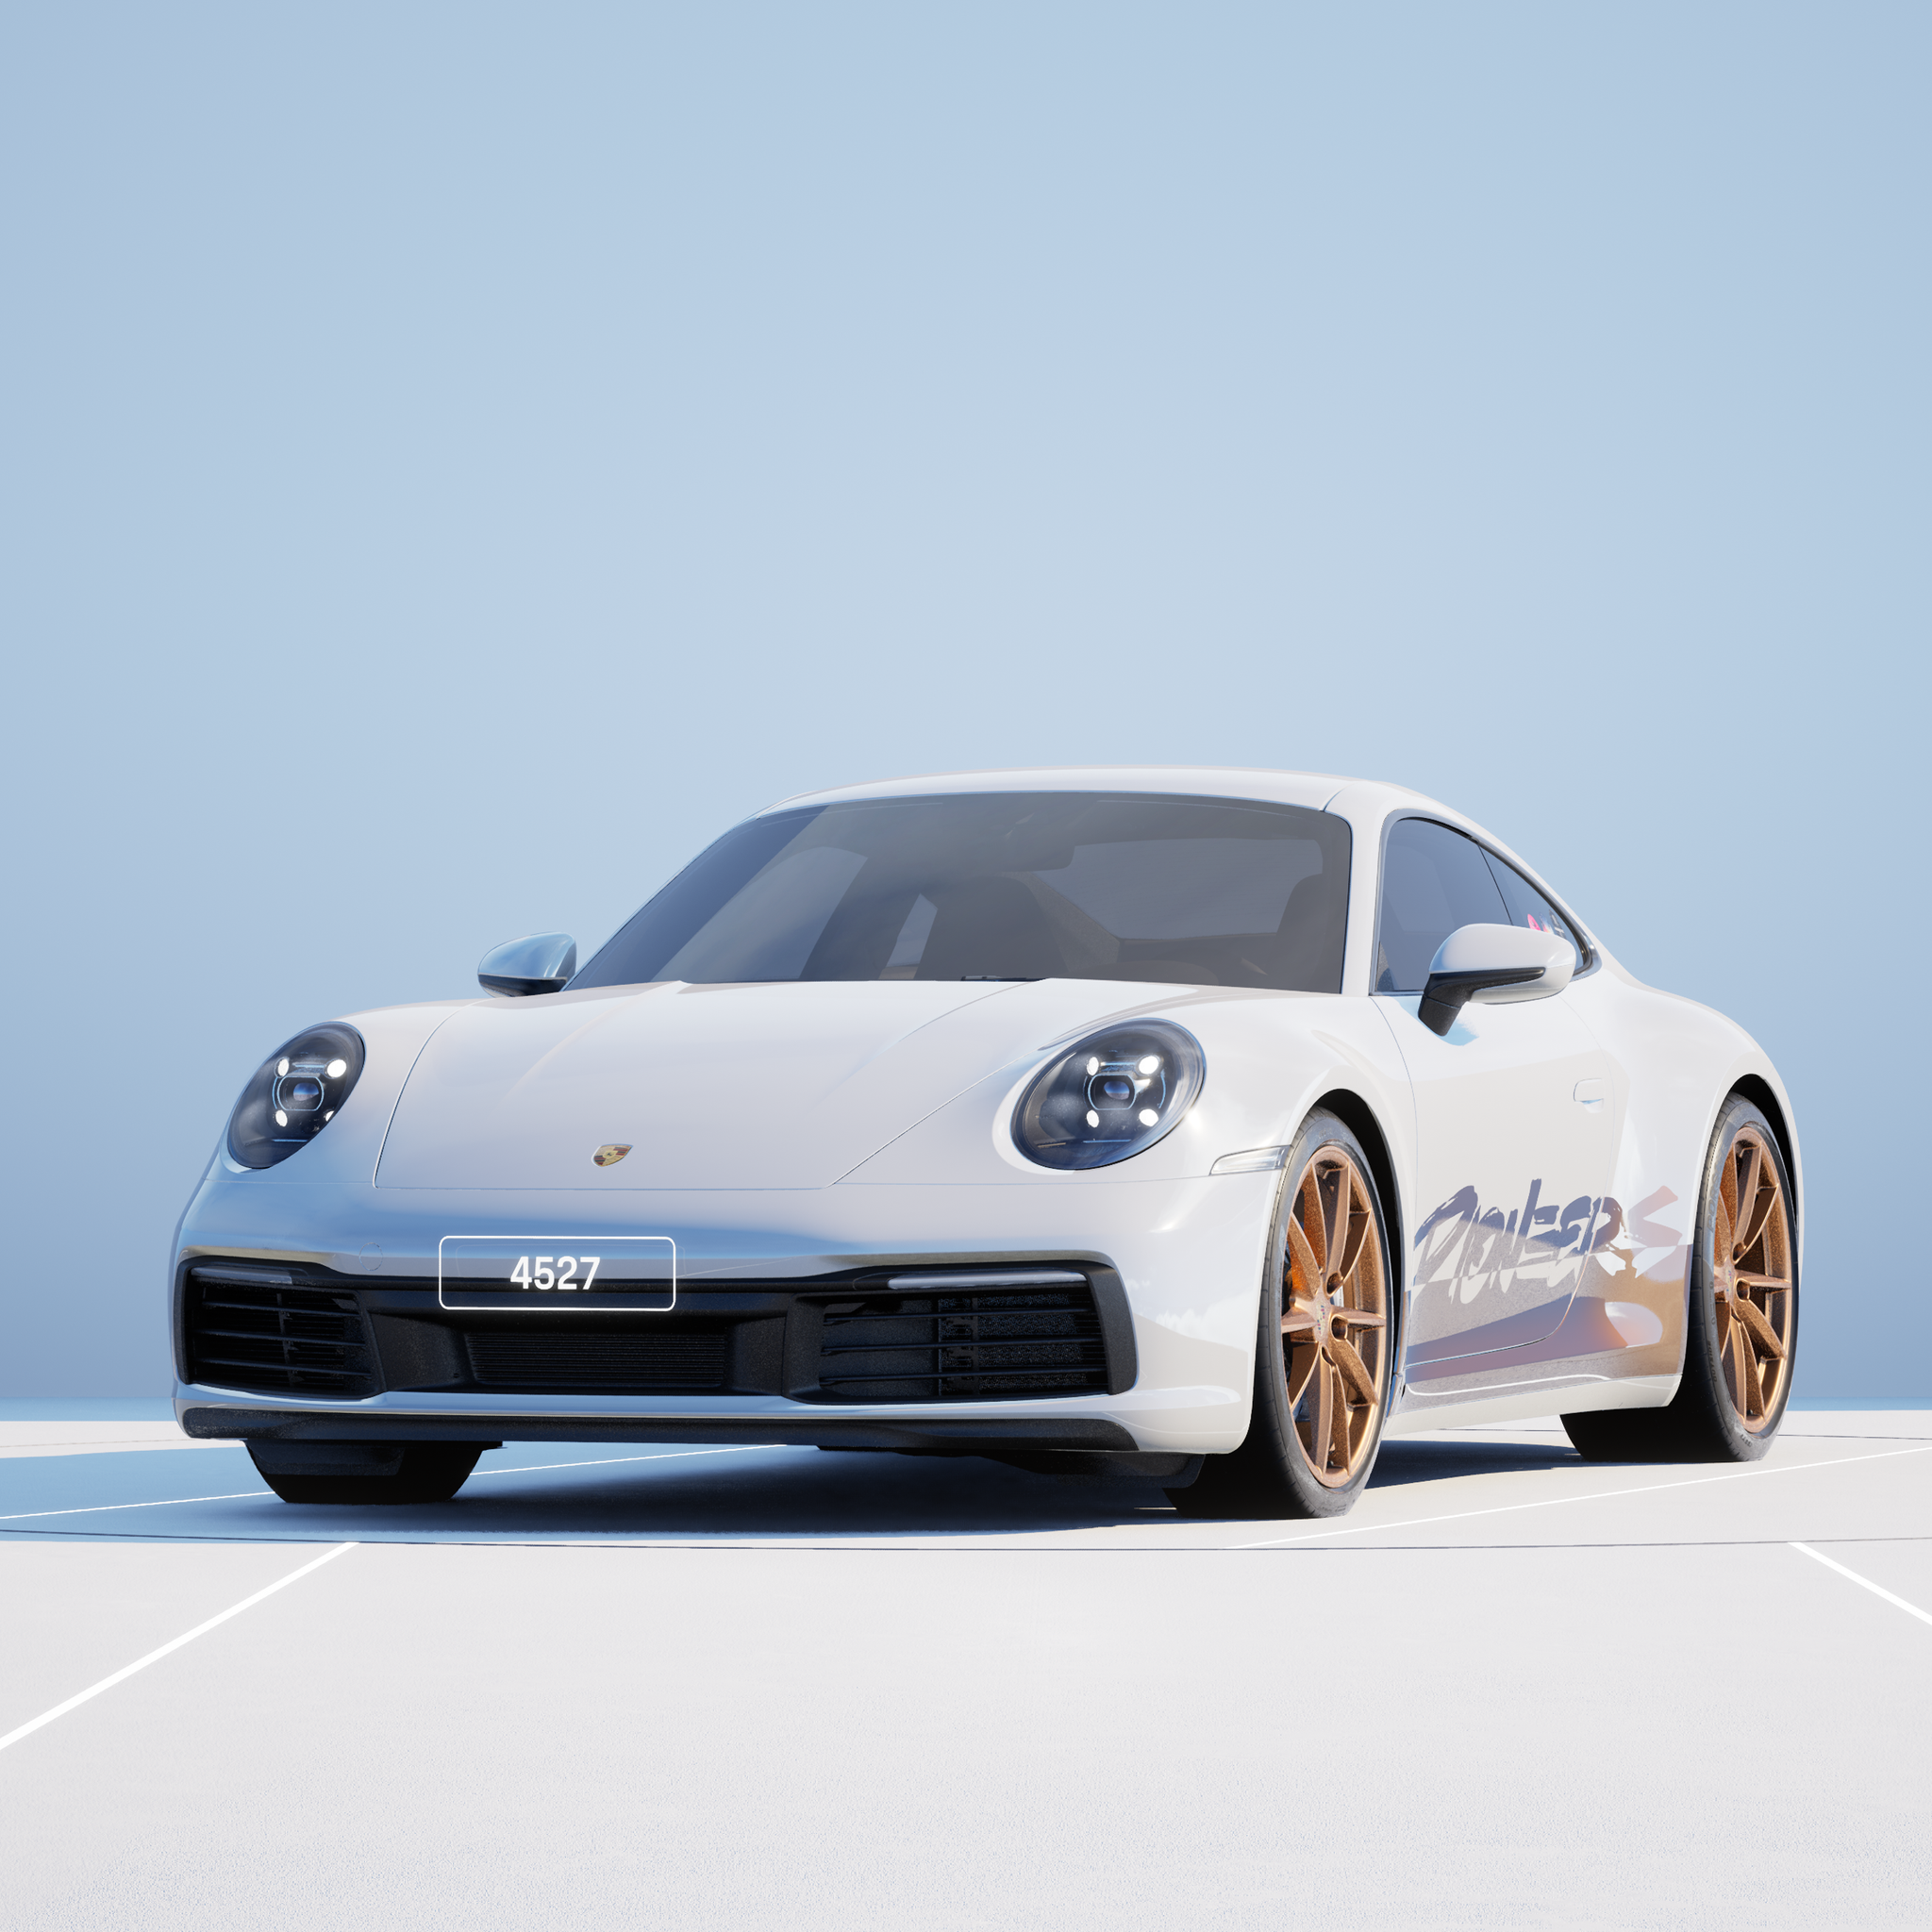 The PORSCHΞ 911 4527 image in phase